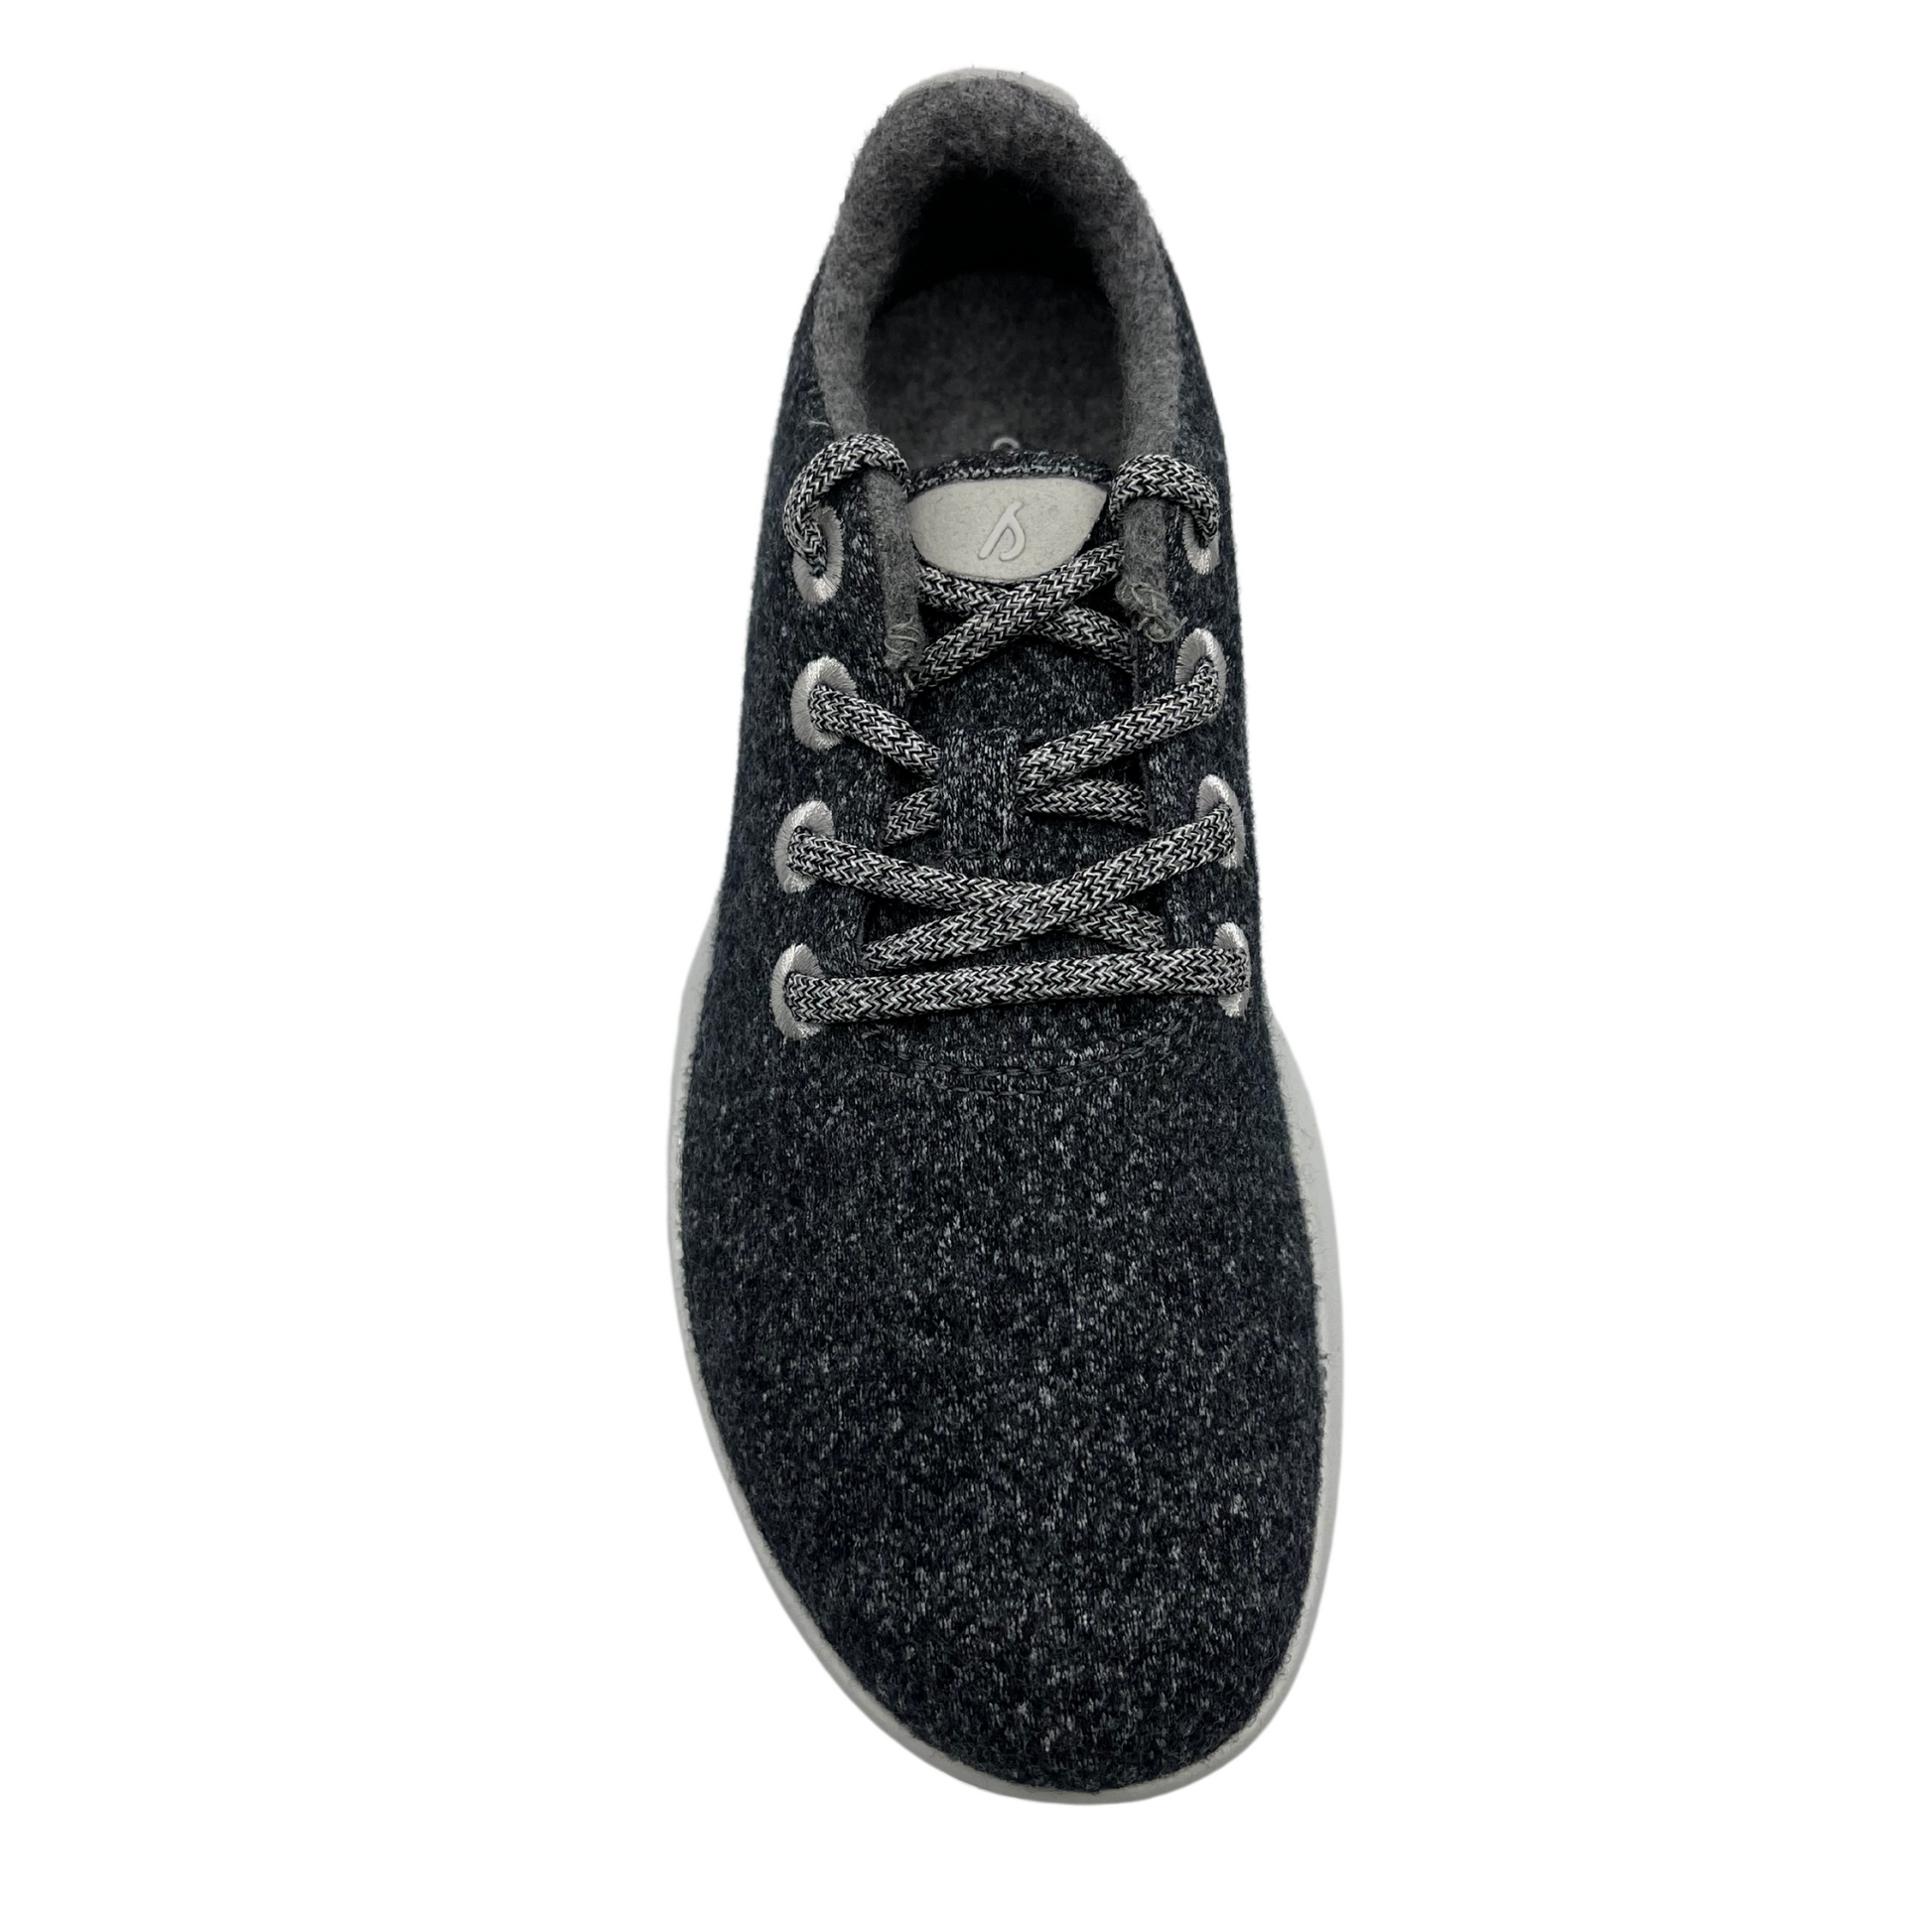 Top view of grey merino wool sneaker with matching laces and white outsole